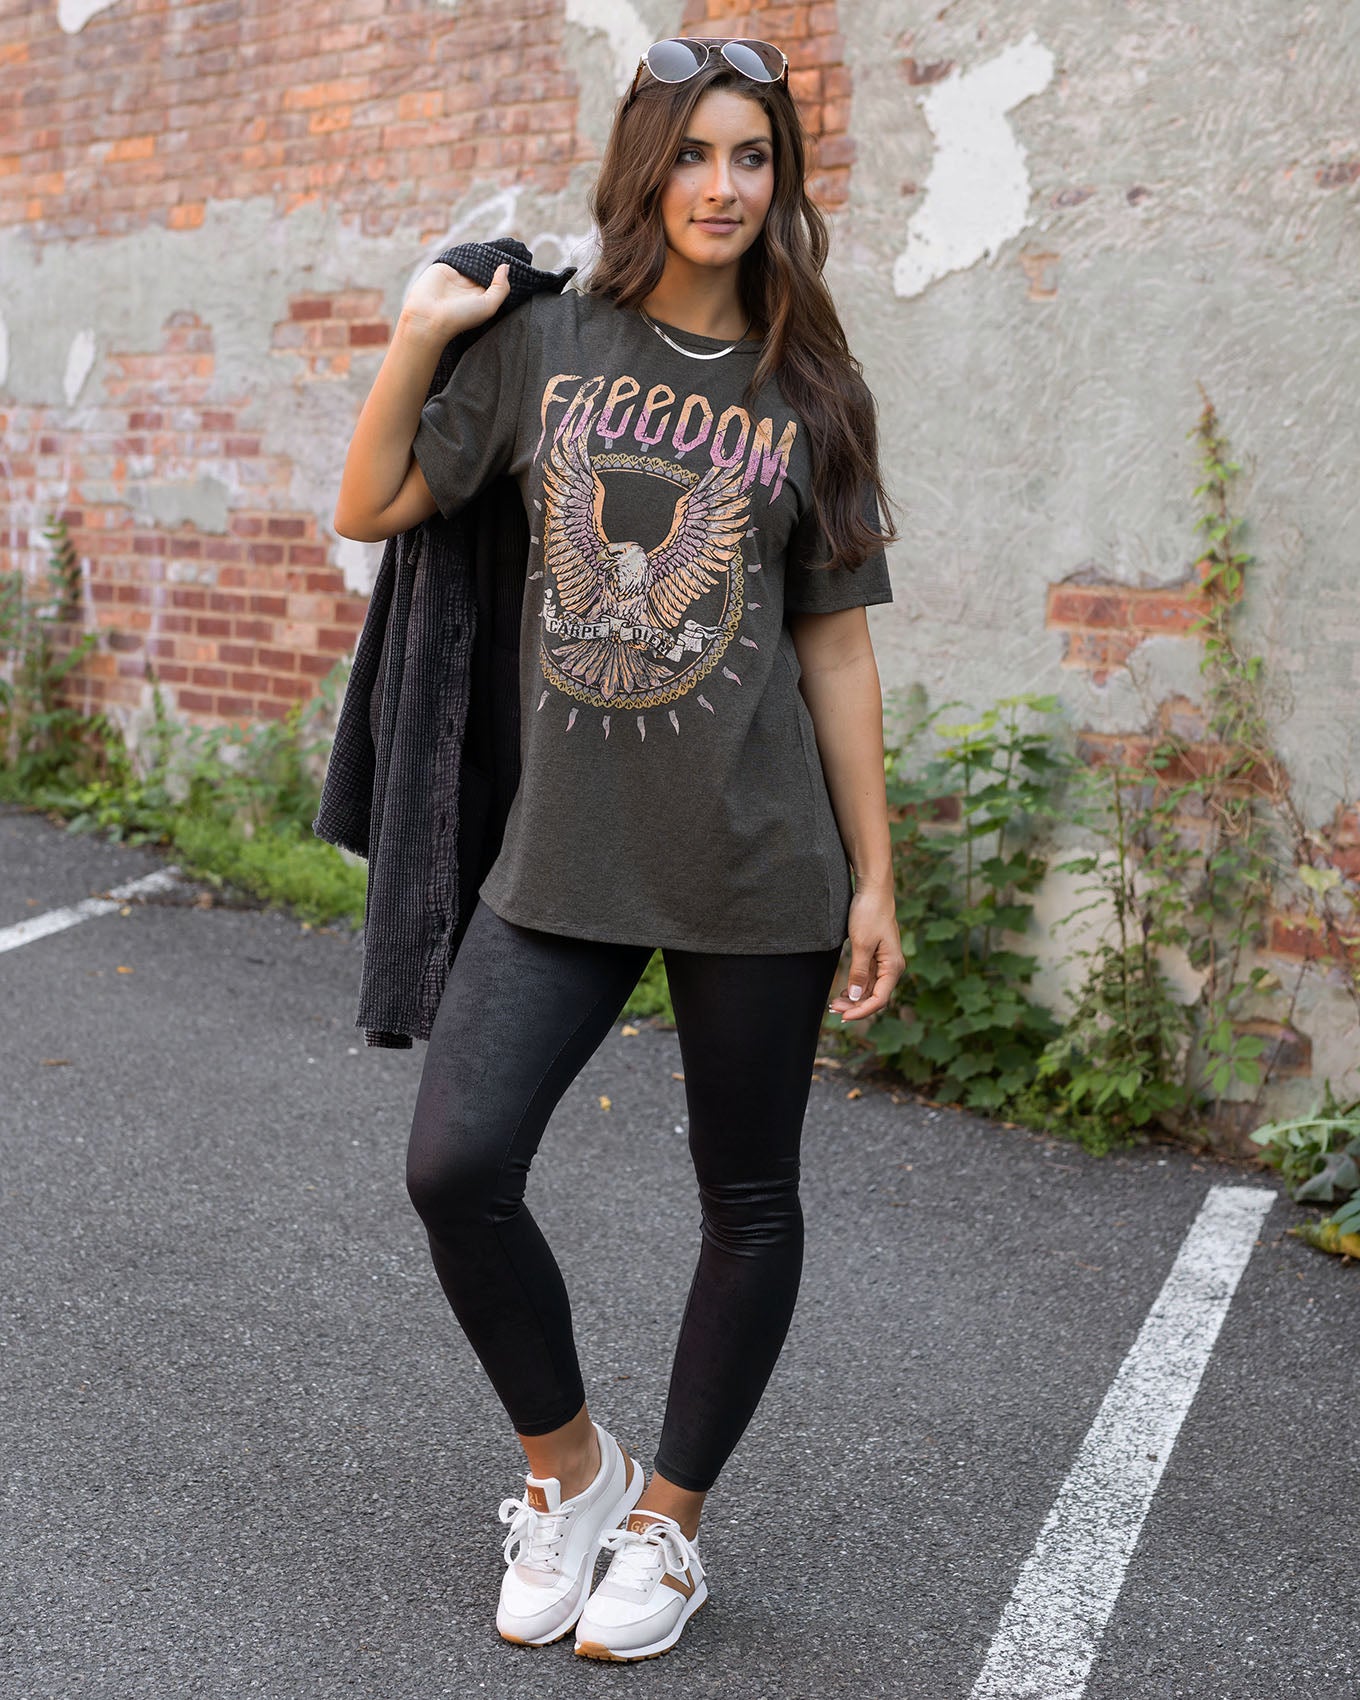 Full body view of Girlfriend Fit Graphic Tee - Freedom